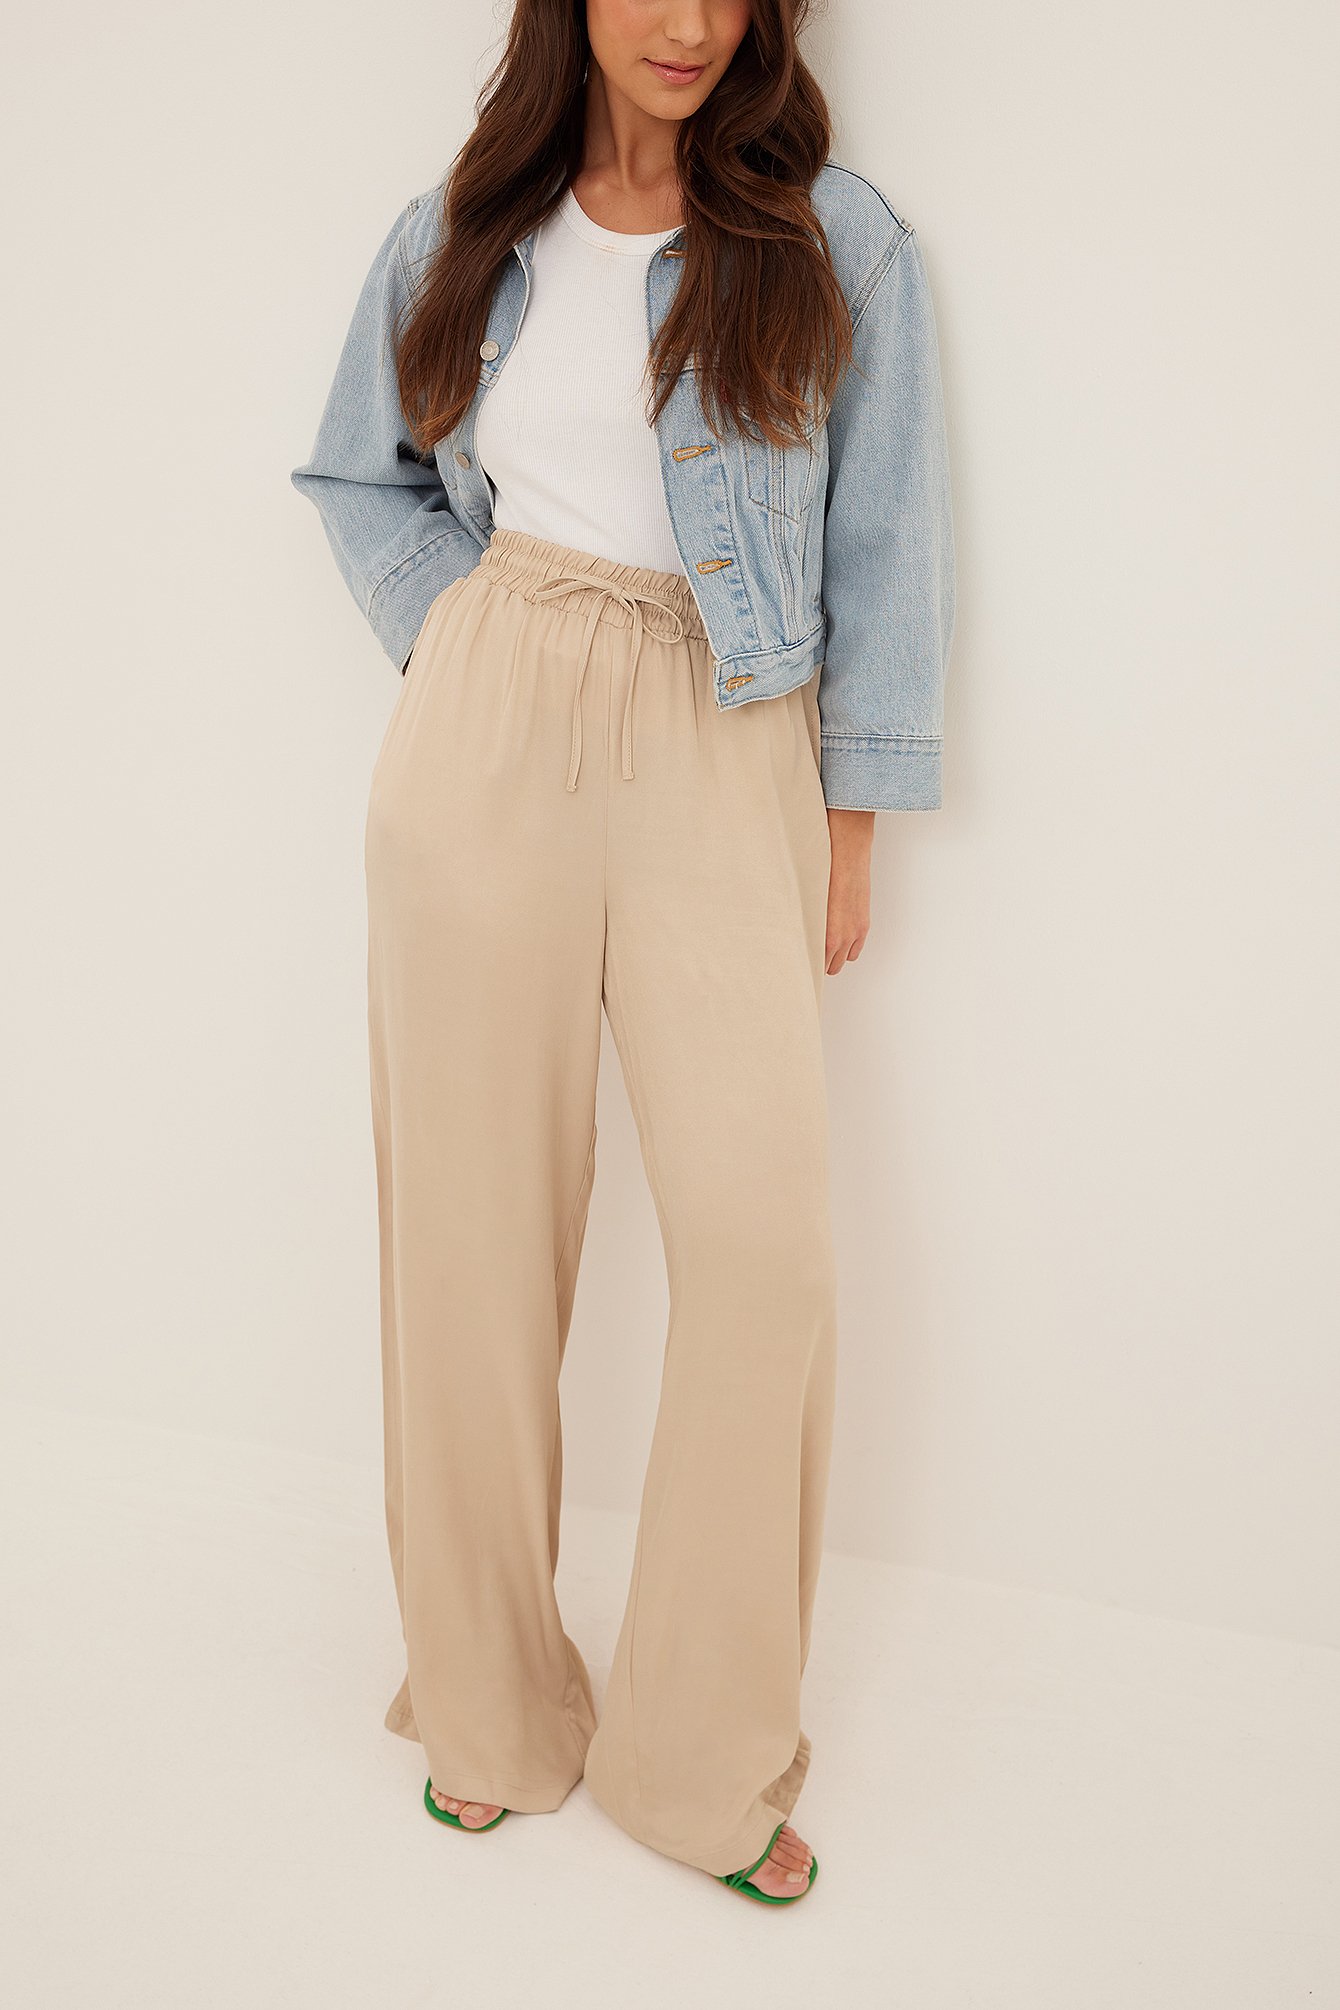 Beige Flowy Recycled Satin Pants